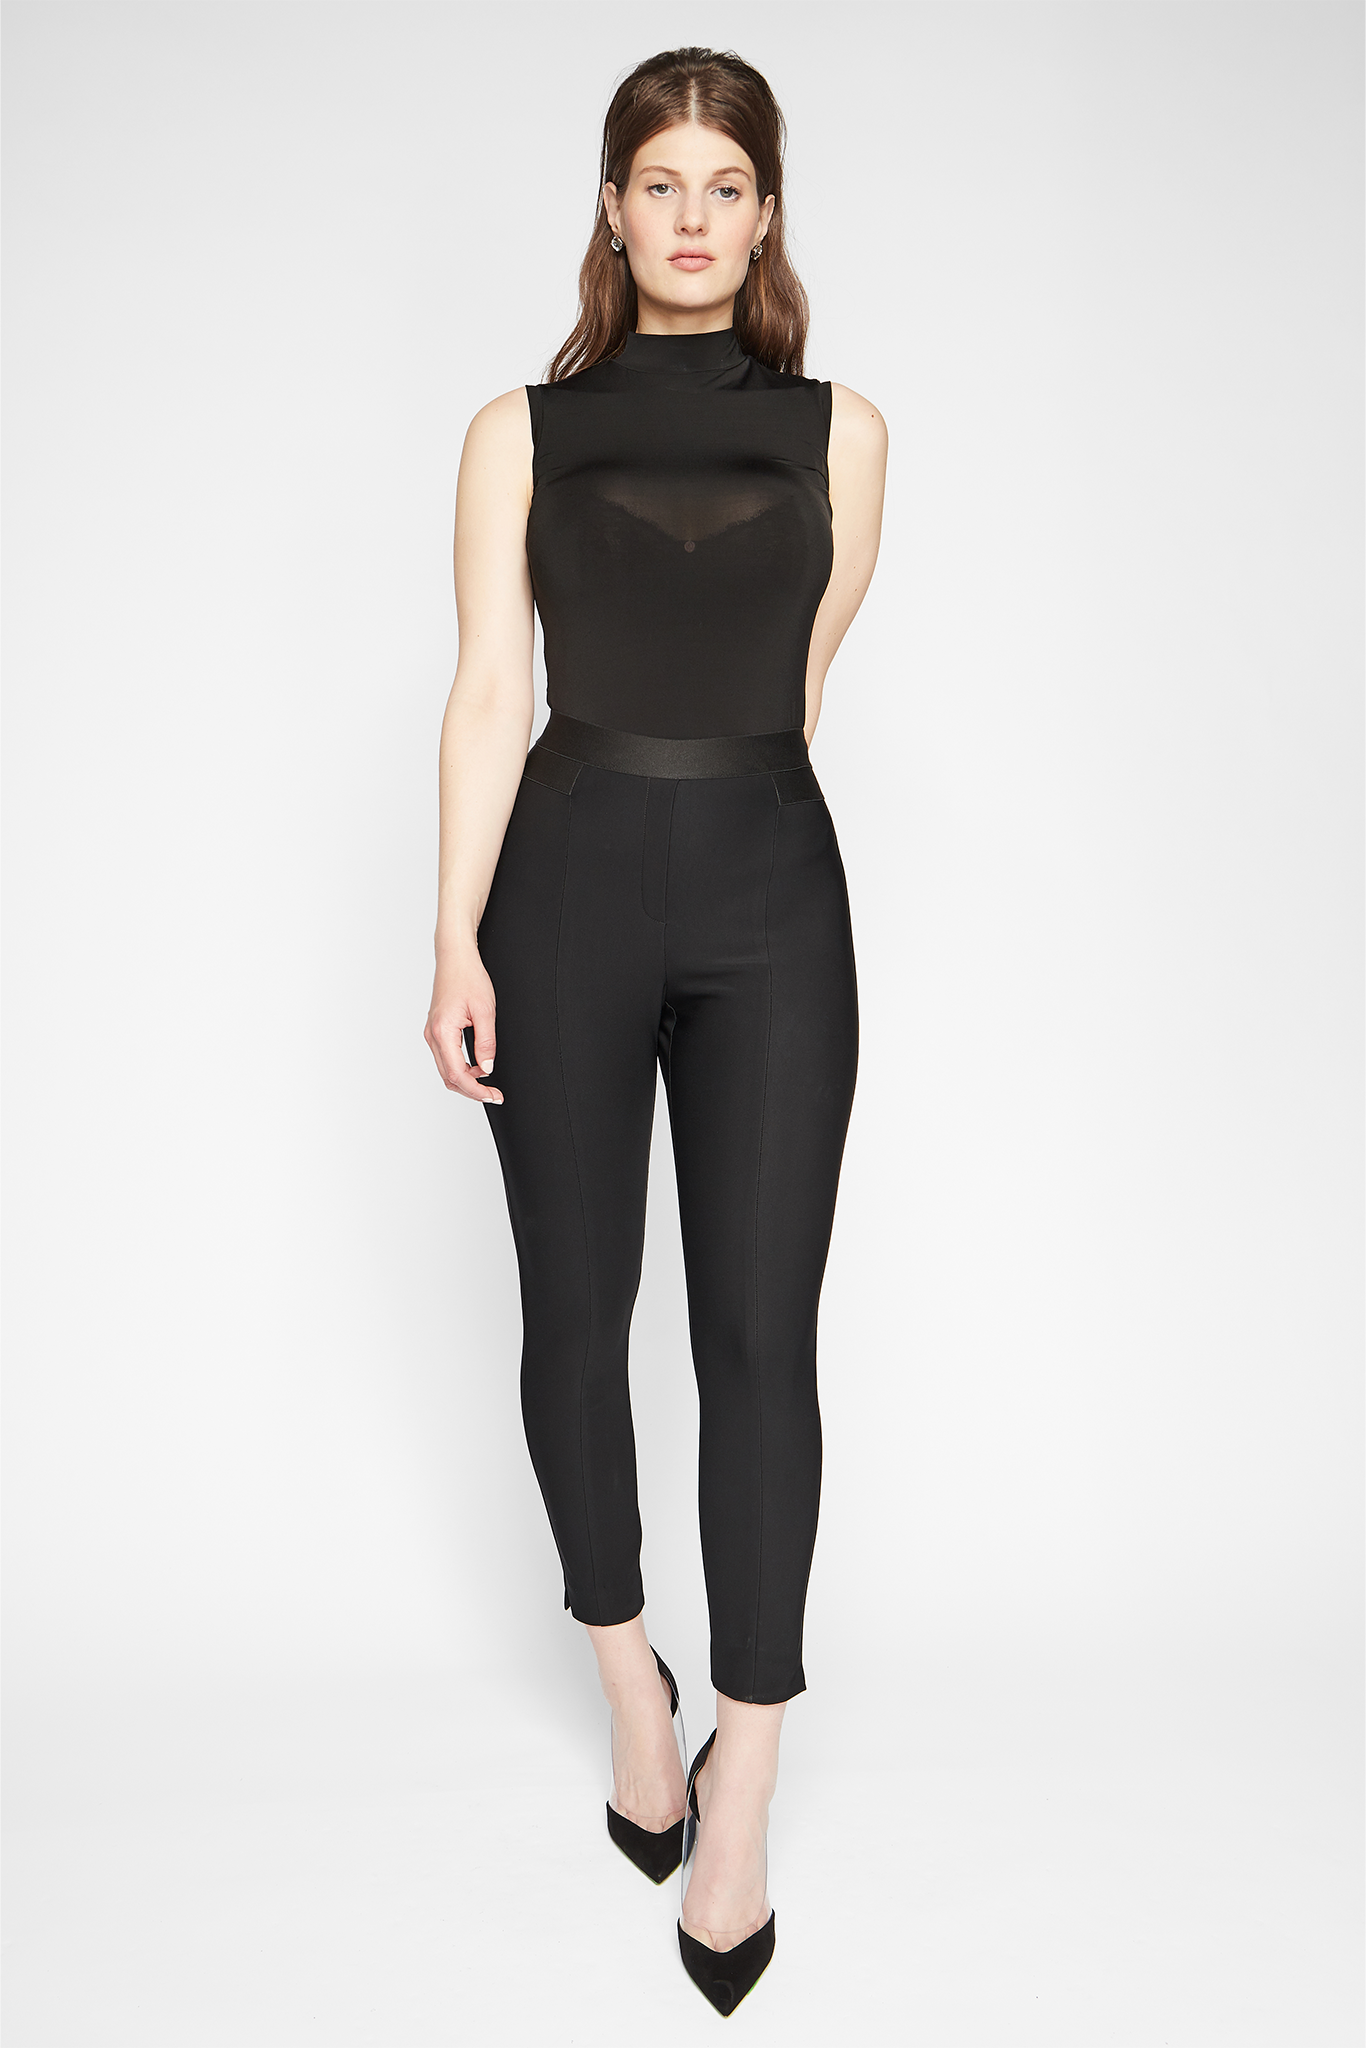 Front view of a woman wearing a black stretch viscose cropped pant with elastic waistband designed by Miriam Baker.